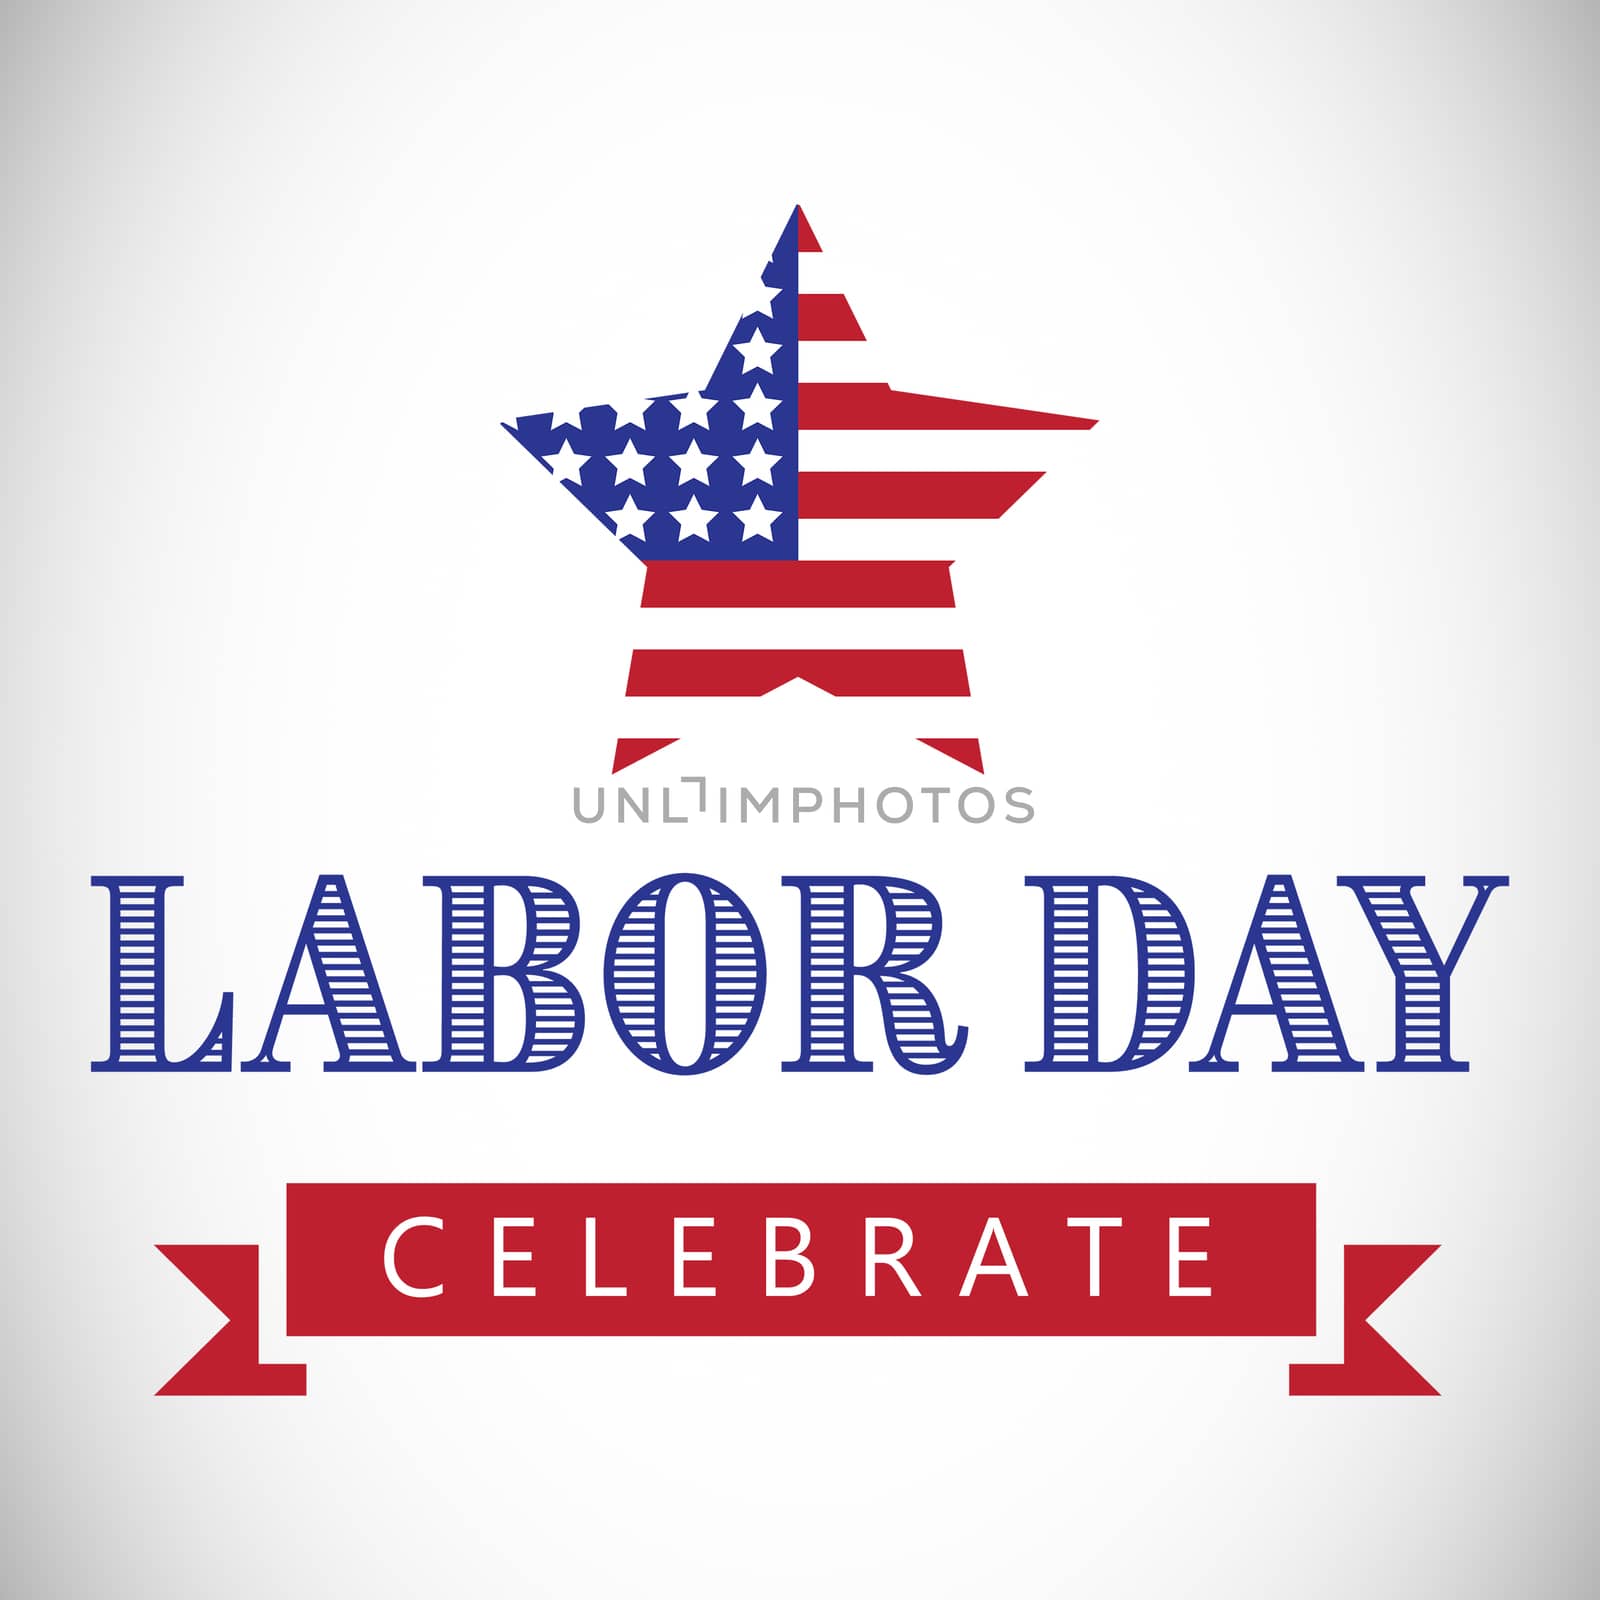 Composite image of labor day celebrate text and star shape American flag against white background